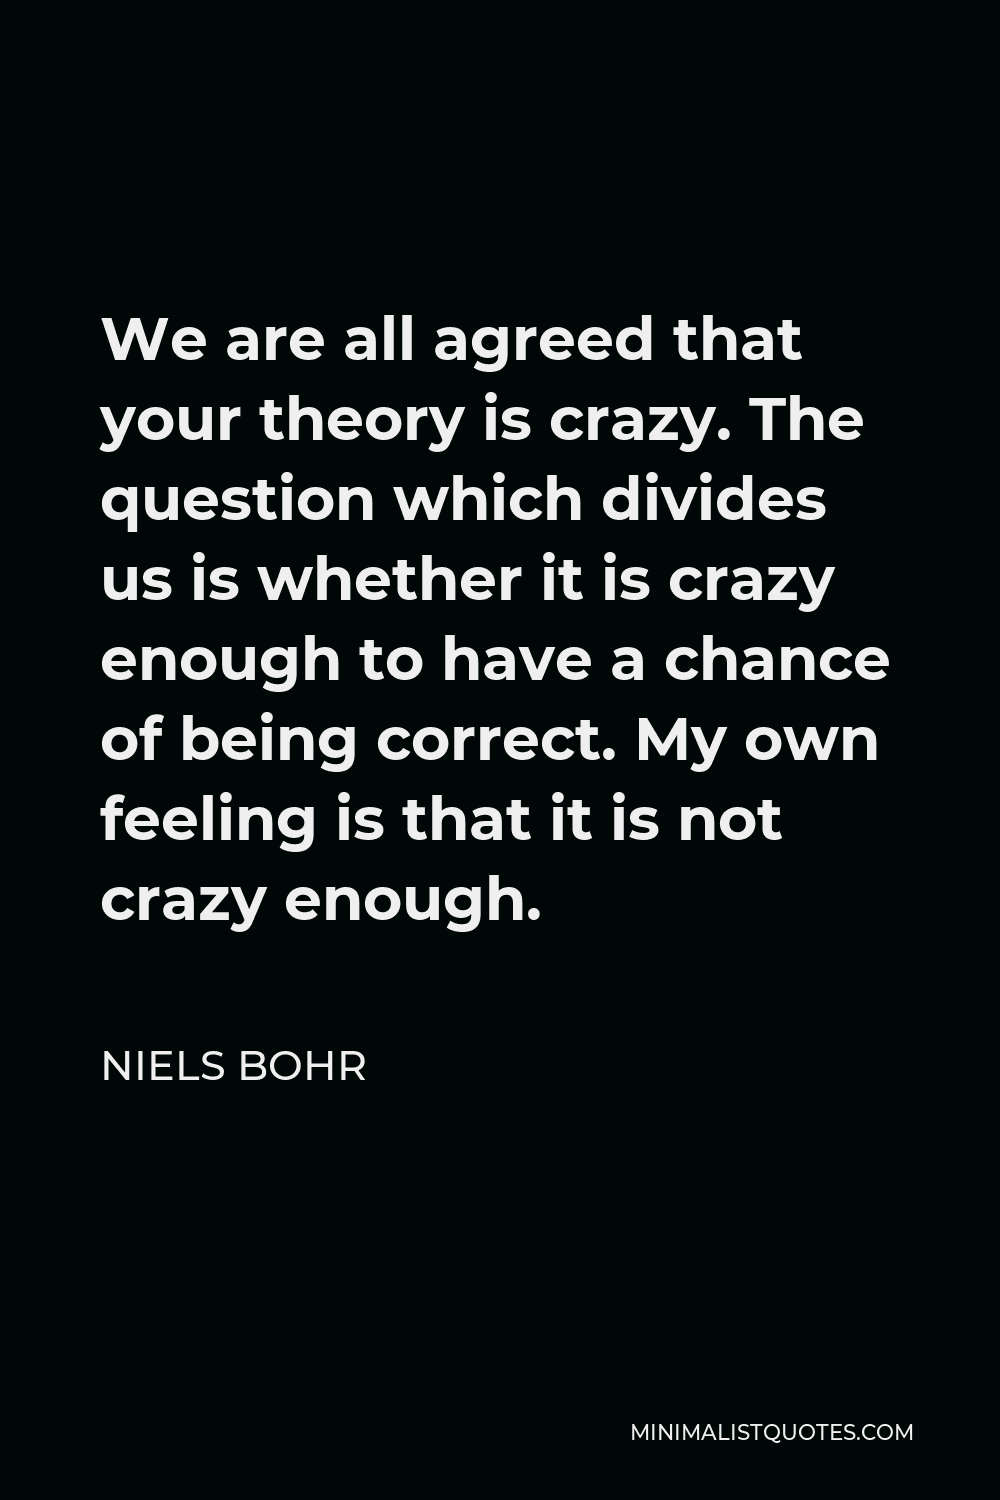 Niels Bohr Quote - We are all agreed that your theory is crazy. The question which divides us is whether it is crazy enough to have a chance of being correct. My own feeling is that it is not crazy enough.